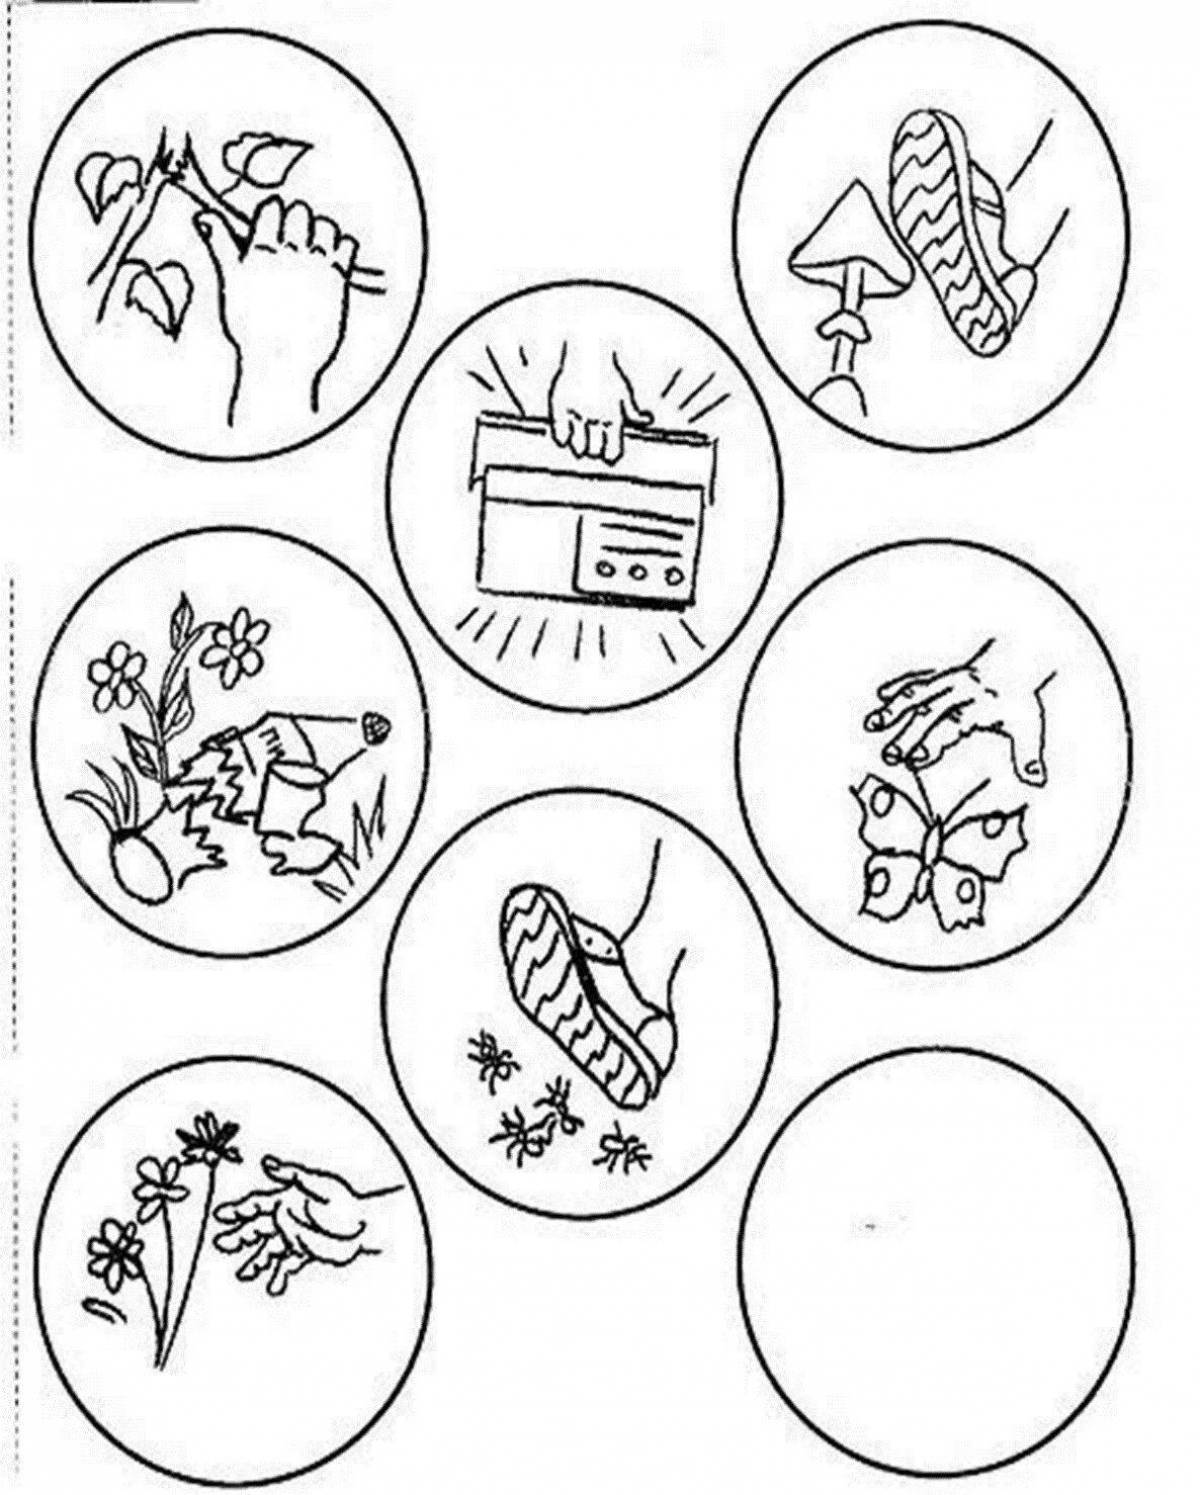 Care for nature inspirational coloring page